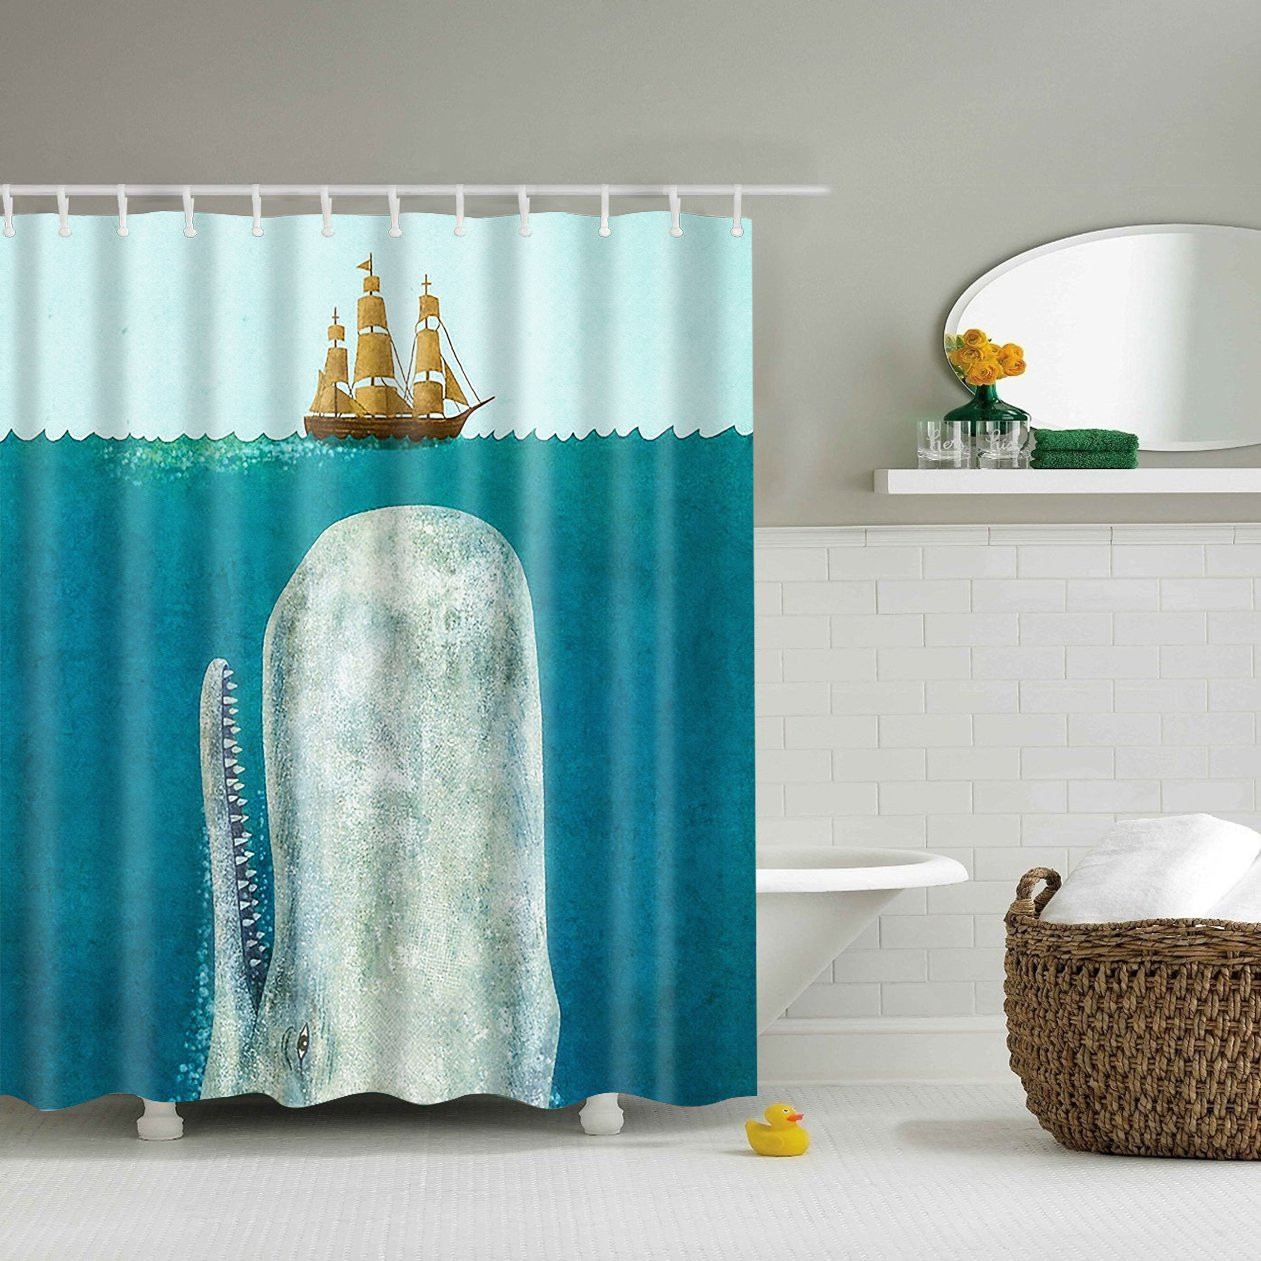 Whale Bathroom Decor
 Ancient Boat The Whale Shower Curtain